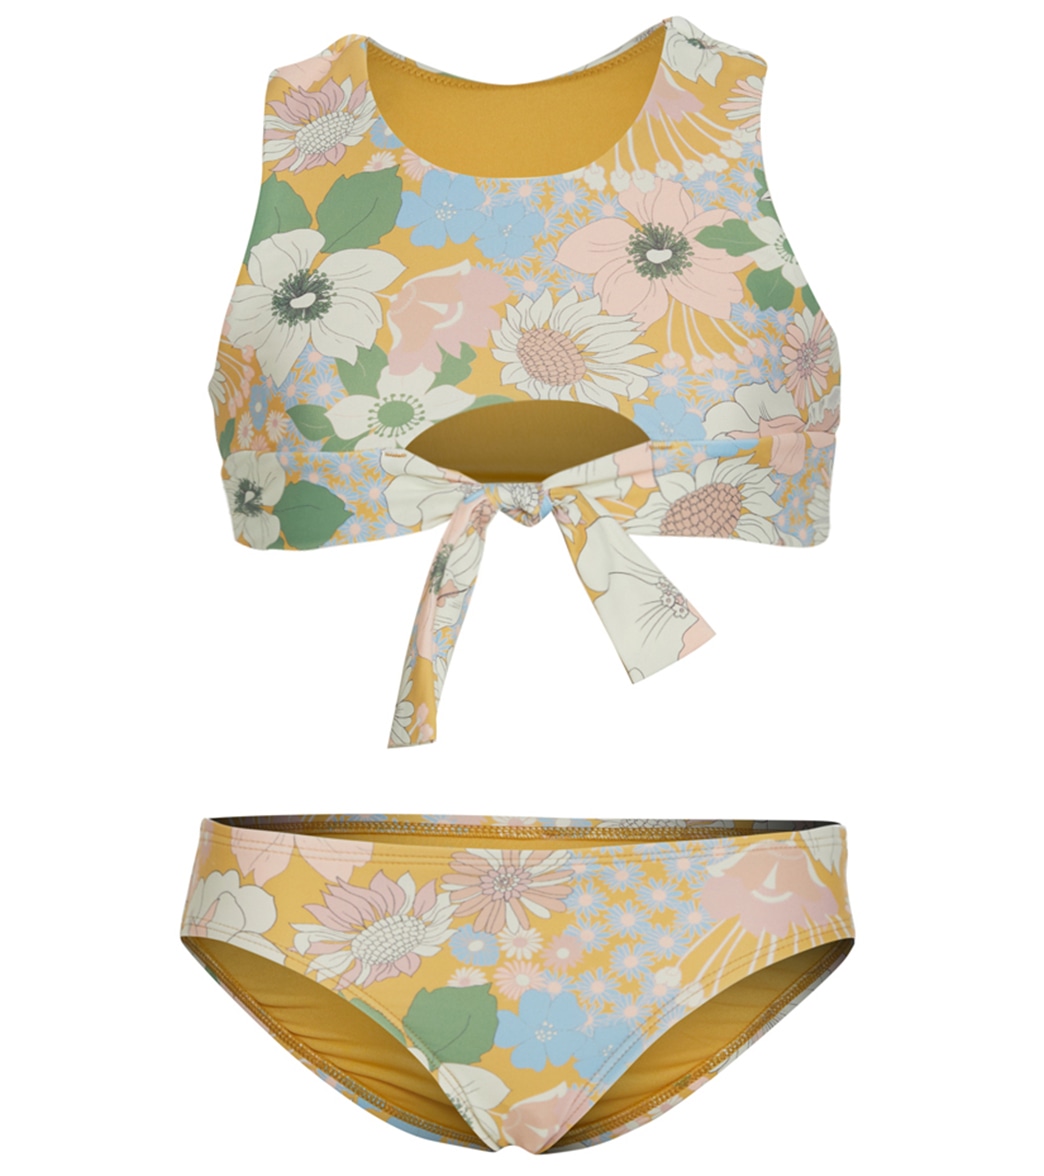 O'neill Girls' Twiggy Banded Tie Front Swim Set - Mimosa 10 - Swimoutlet.com